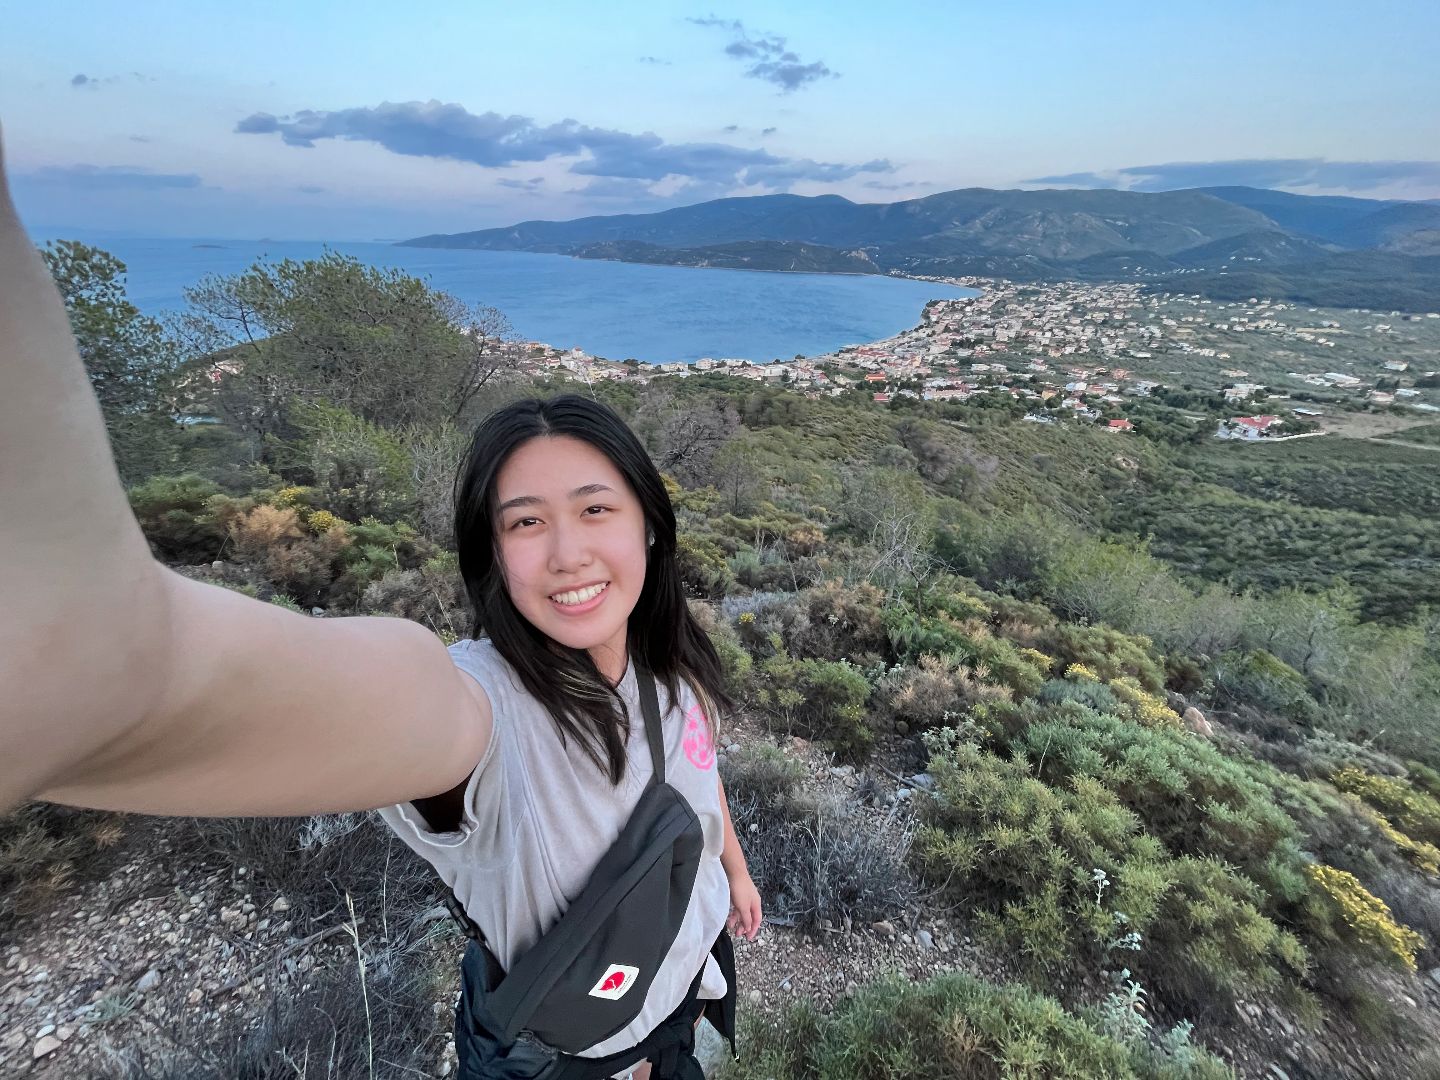 Vicky taking a selfie at the Acropolis